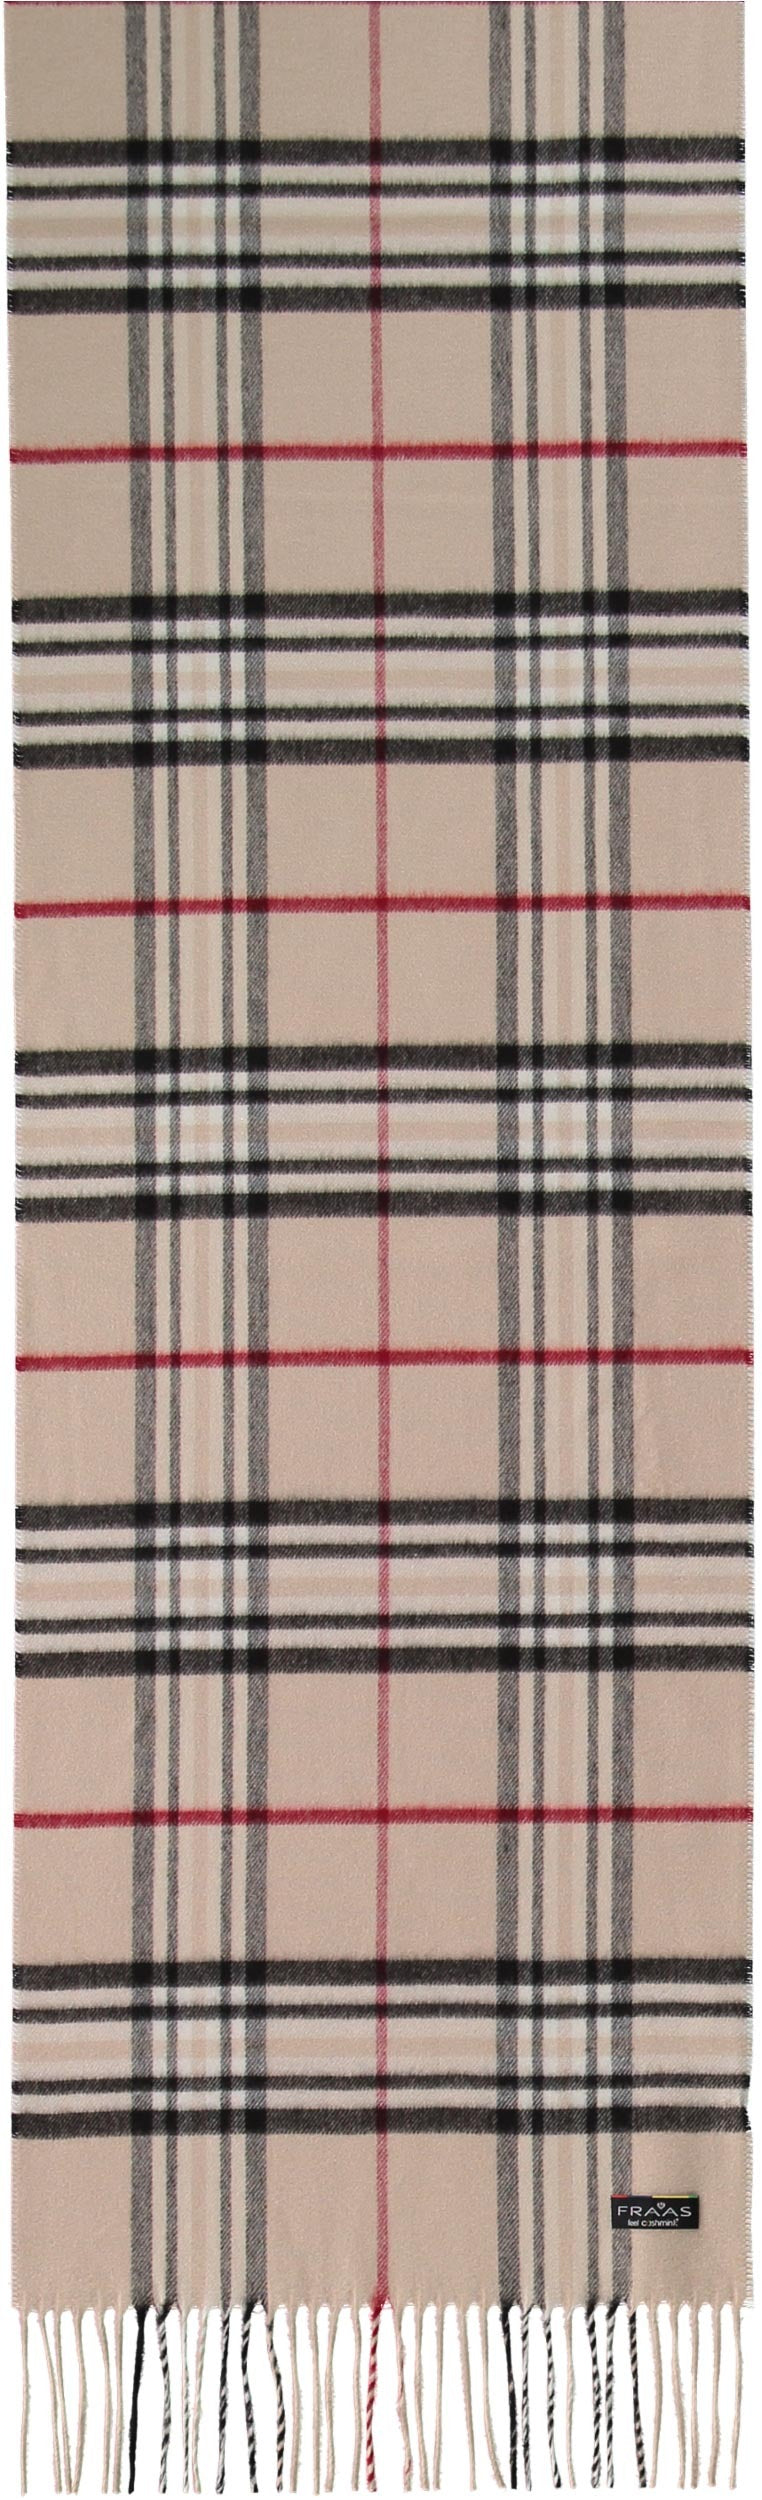 Plaid check in beige by Fraas